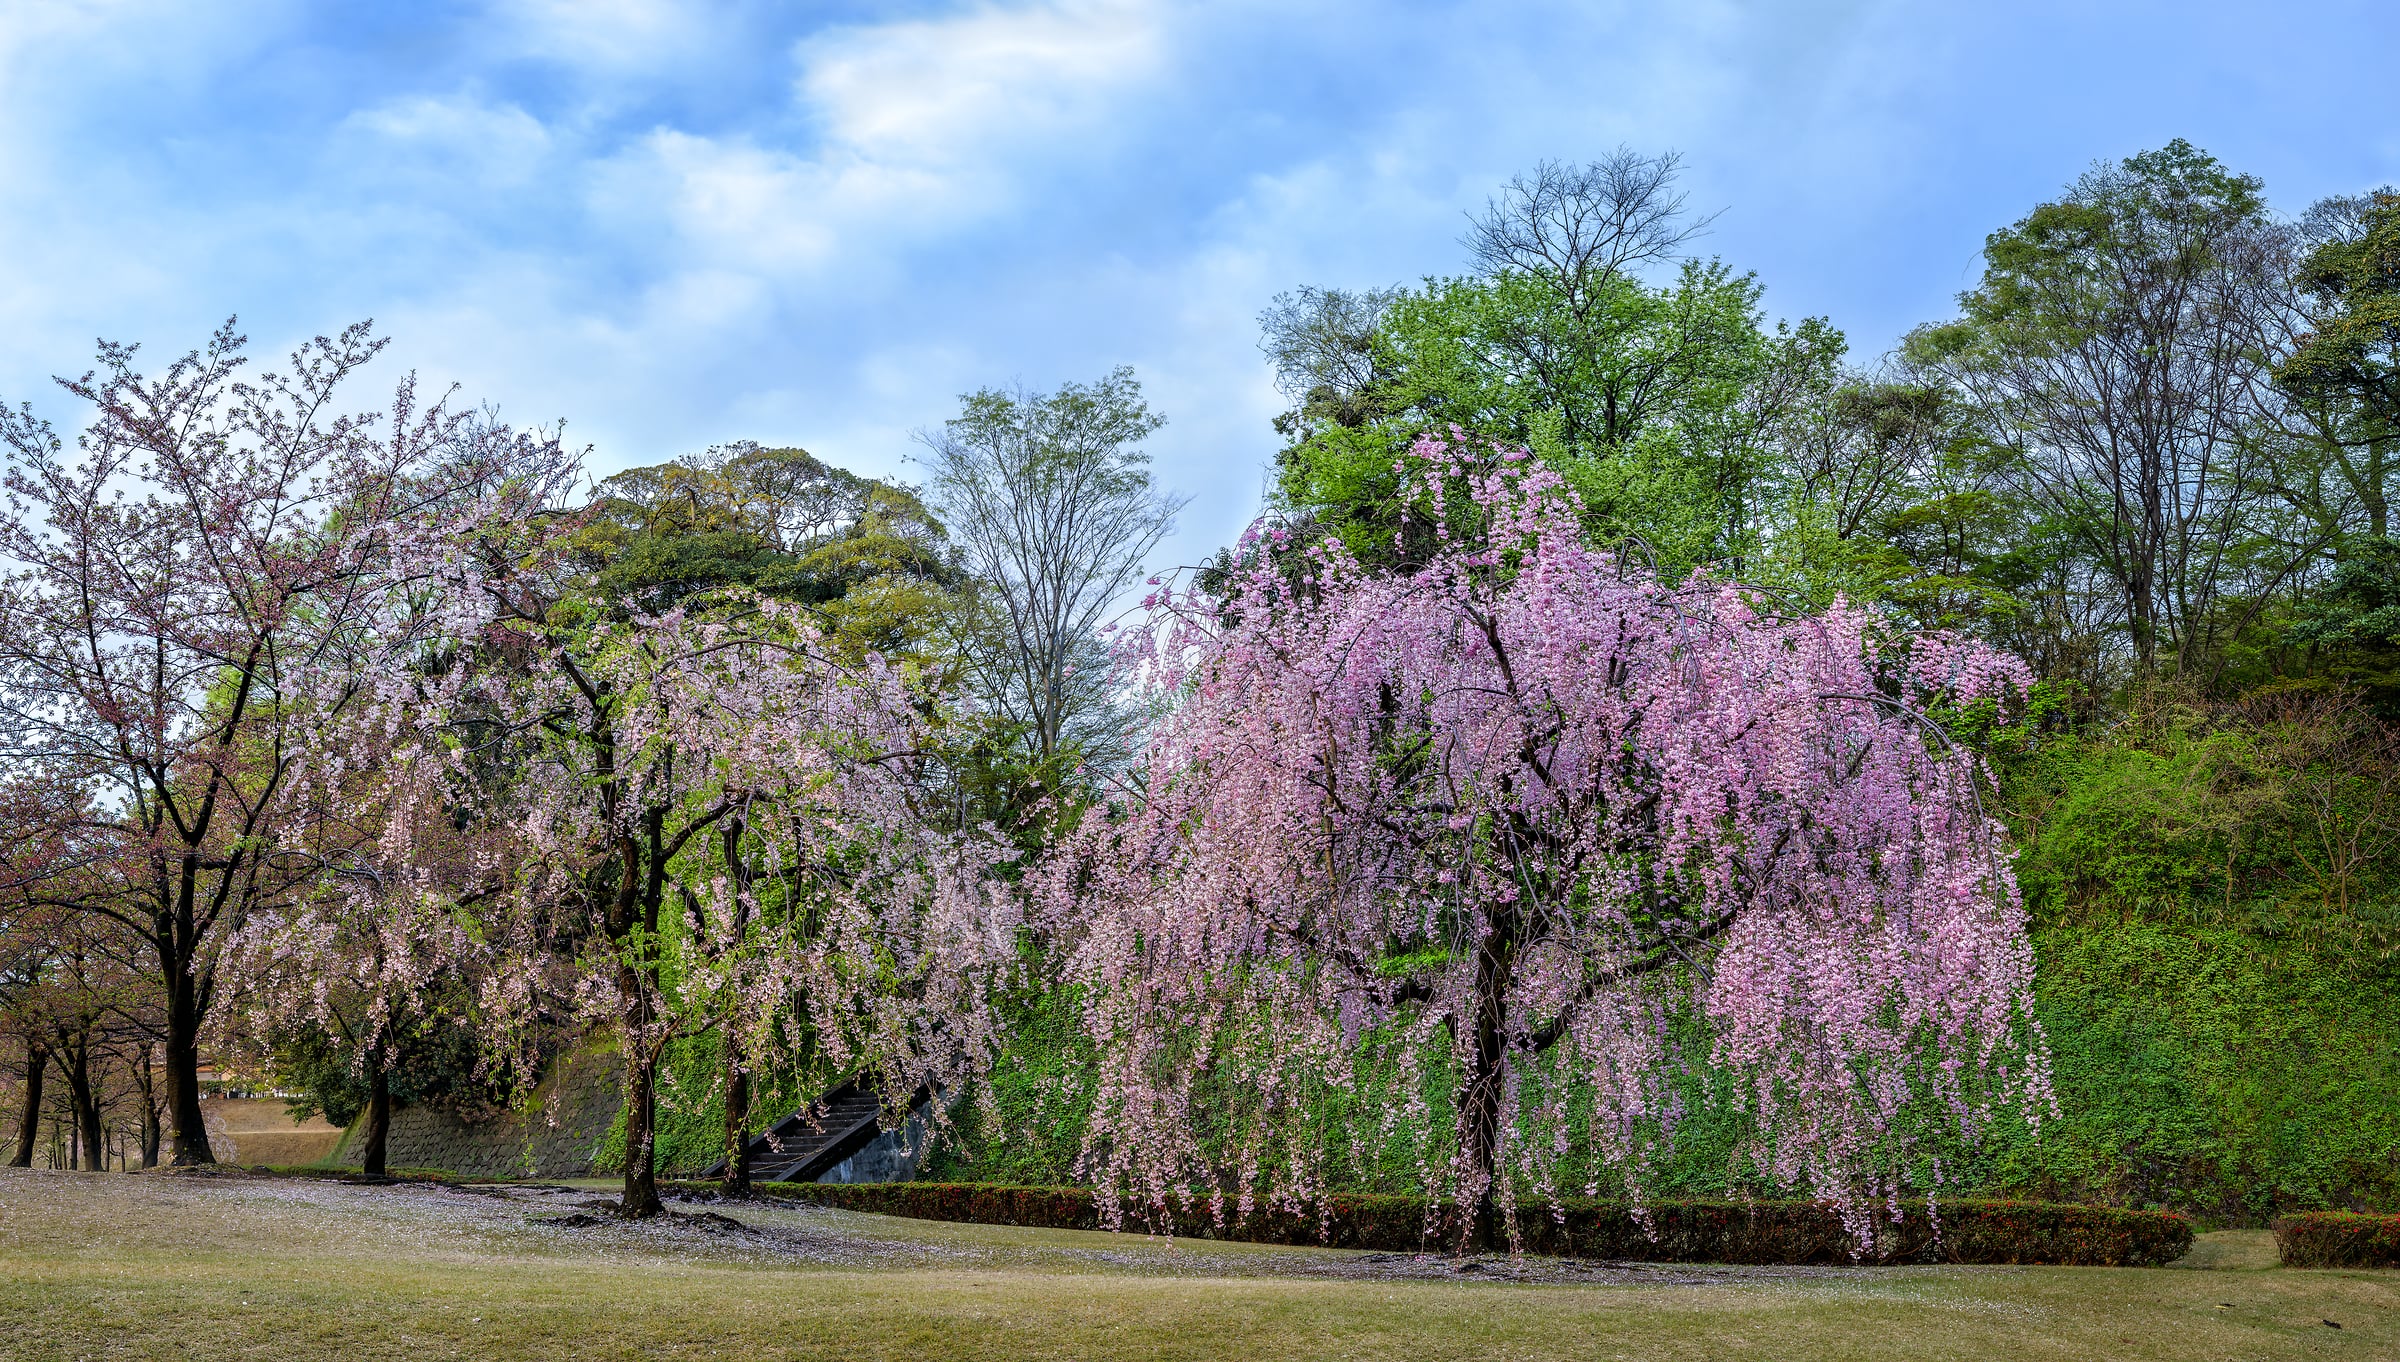 827 megapixels! A very high resolution, large-format VAST photo print of sakura, also known as cherry blossoms in a park; nature photograph created by Scott Dimond at Kanazawa Castle in Kanazawa, Ishikawa, Japan.